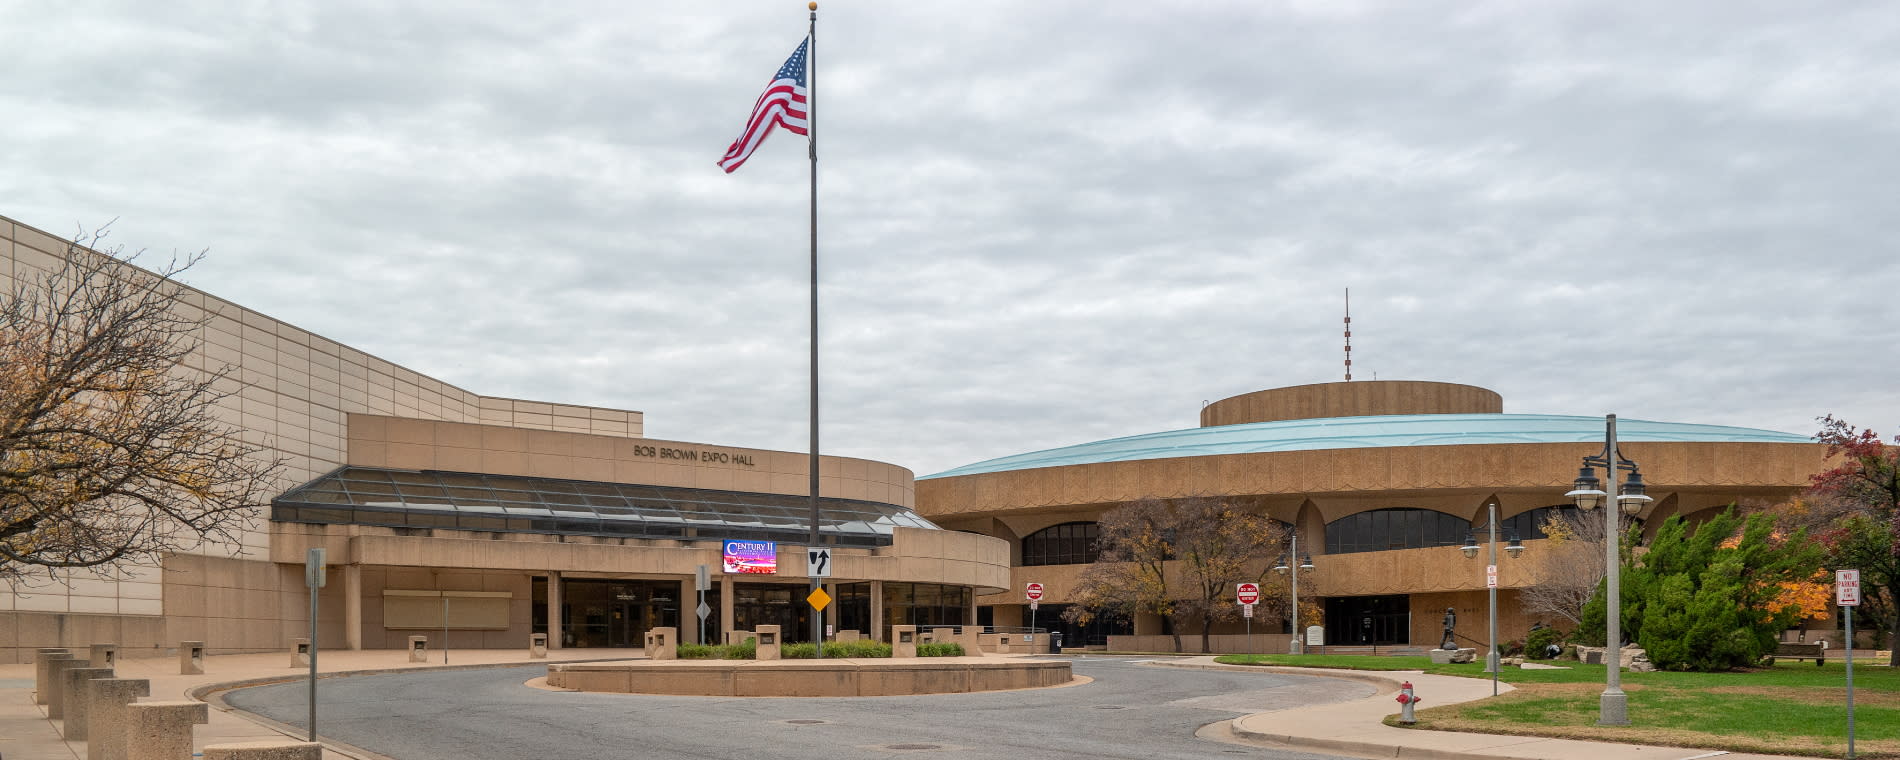 Century II Convention and Performing Arts Center Main Entrance